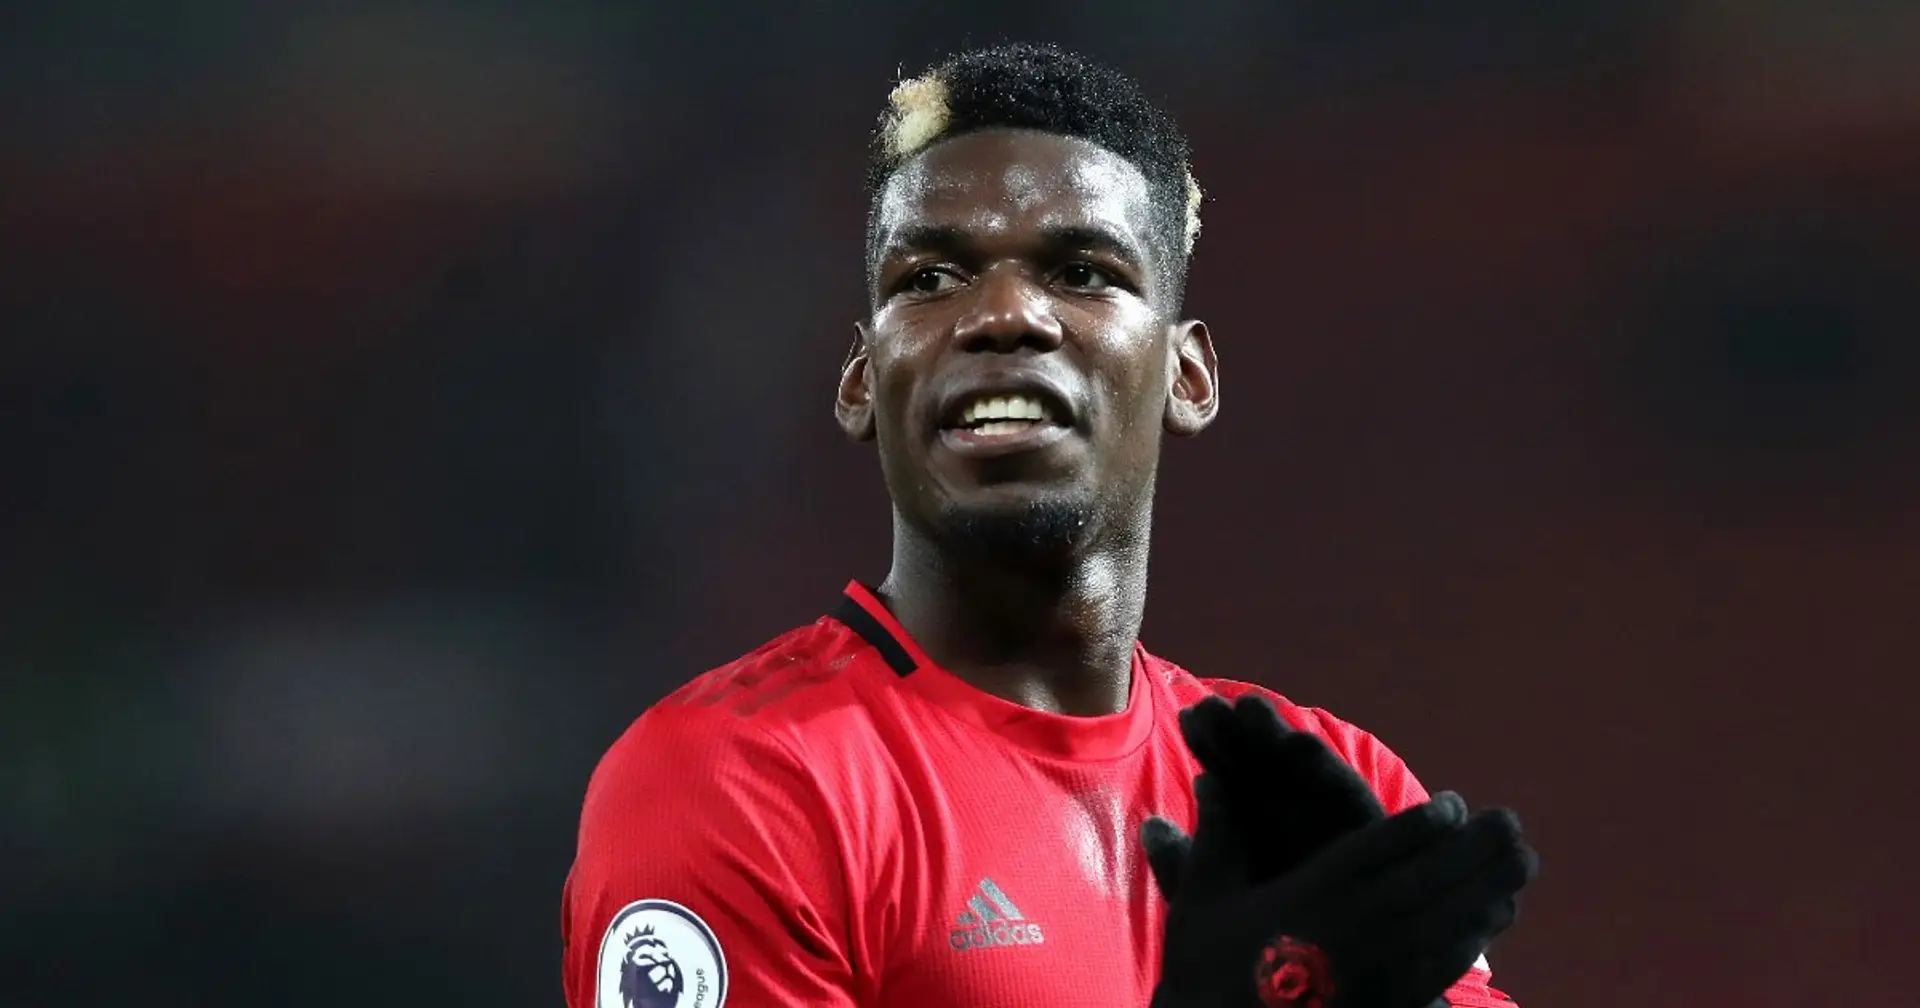 Barcelona might go after Paul Pogba, player open to move (reliability: 3 stars)